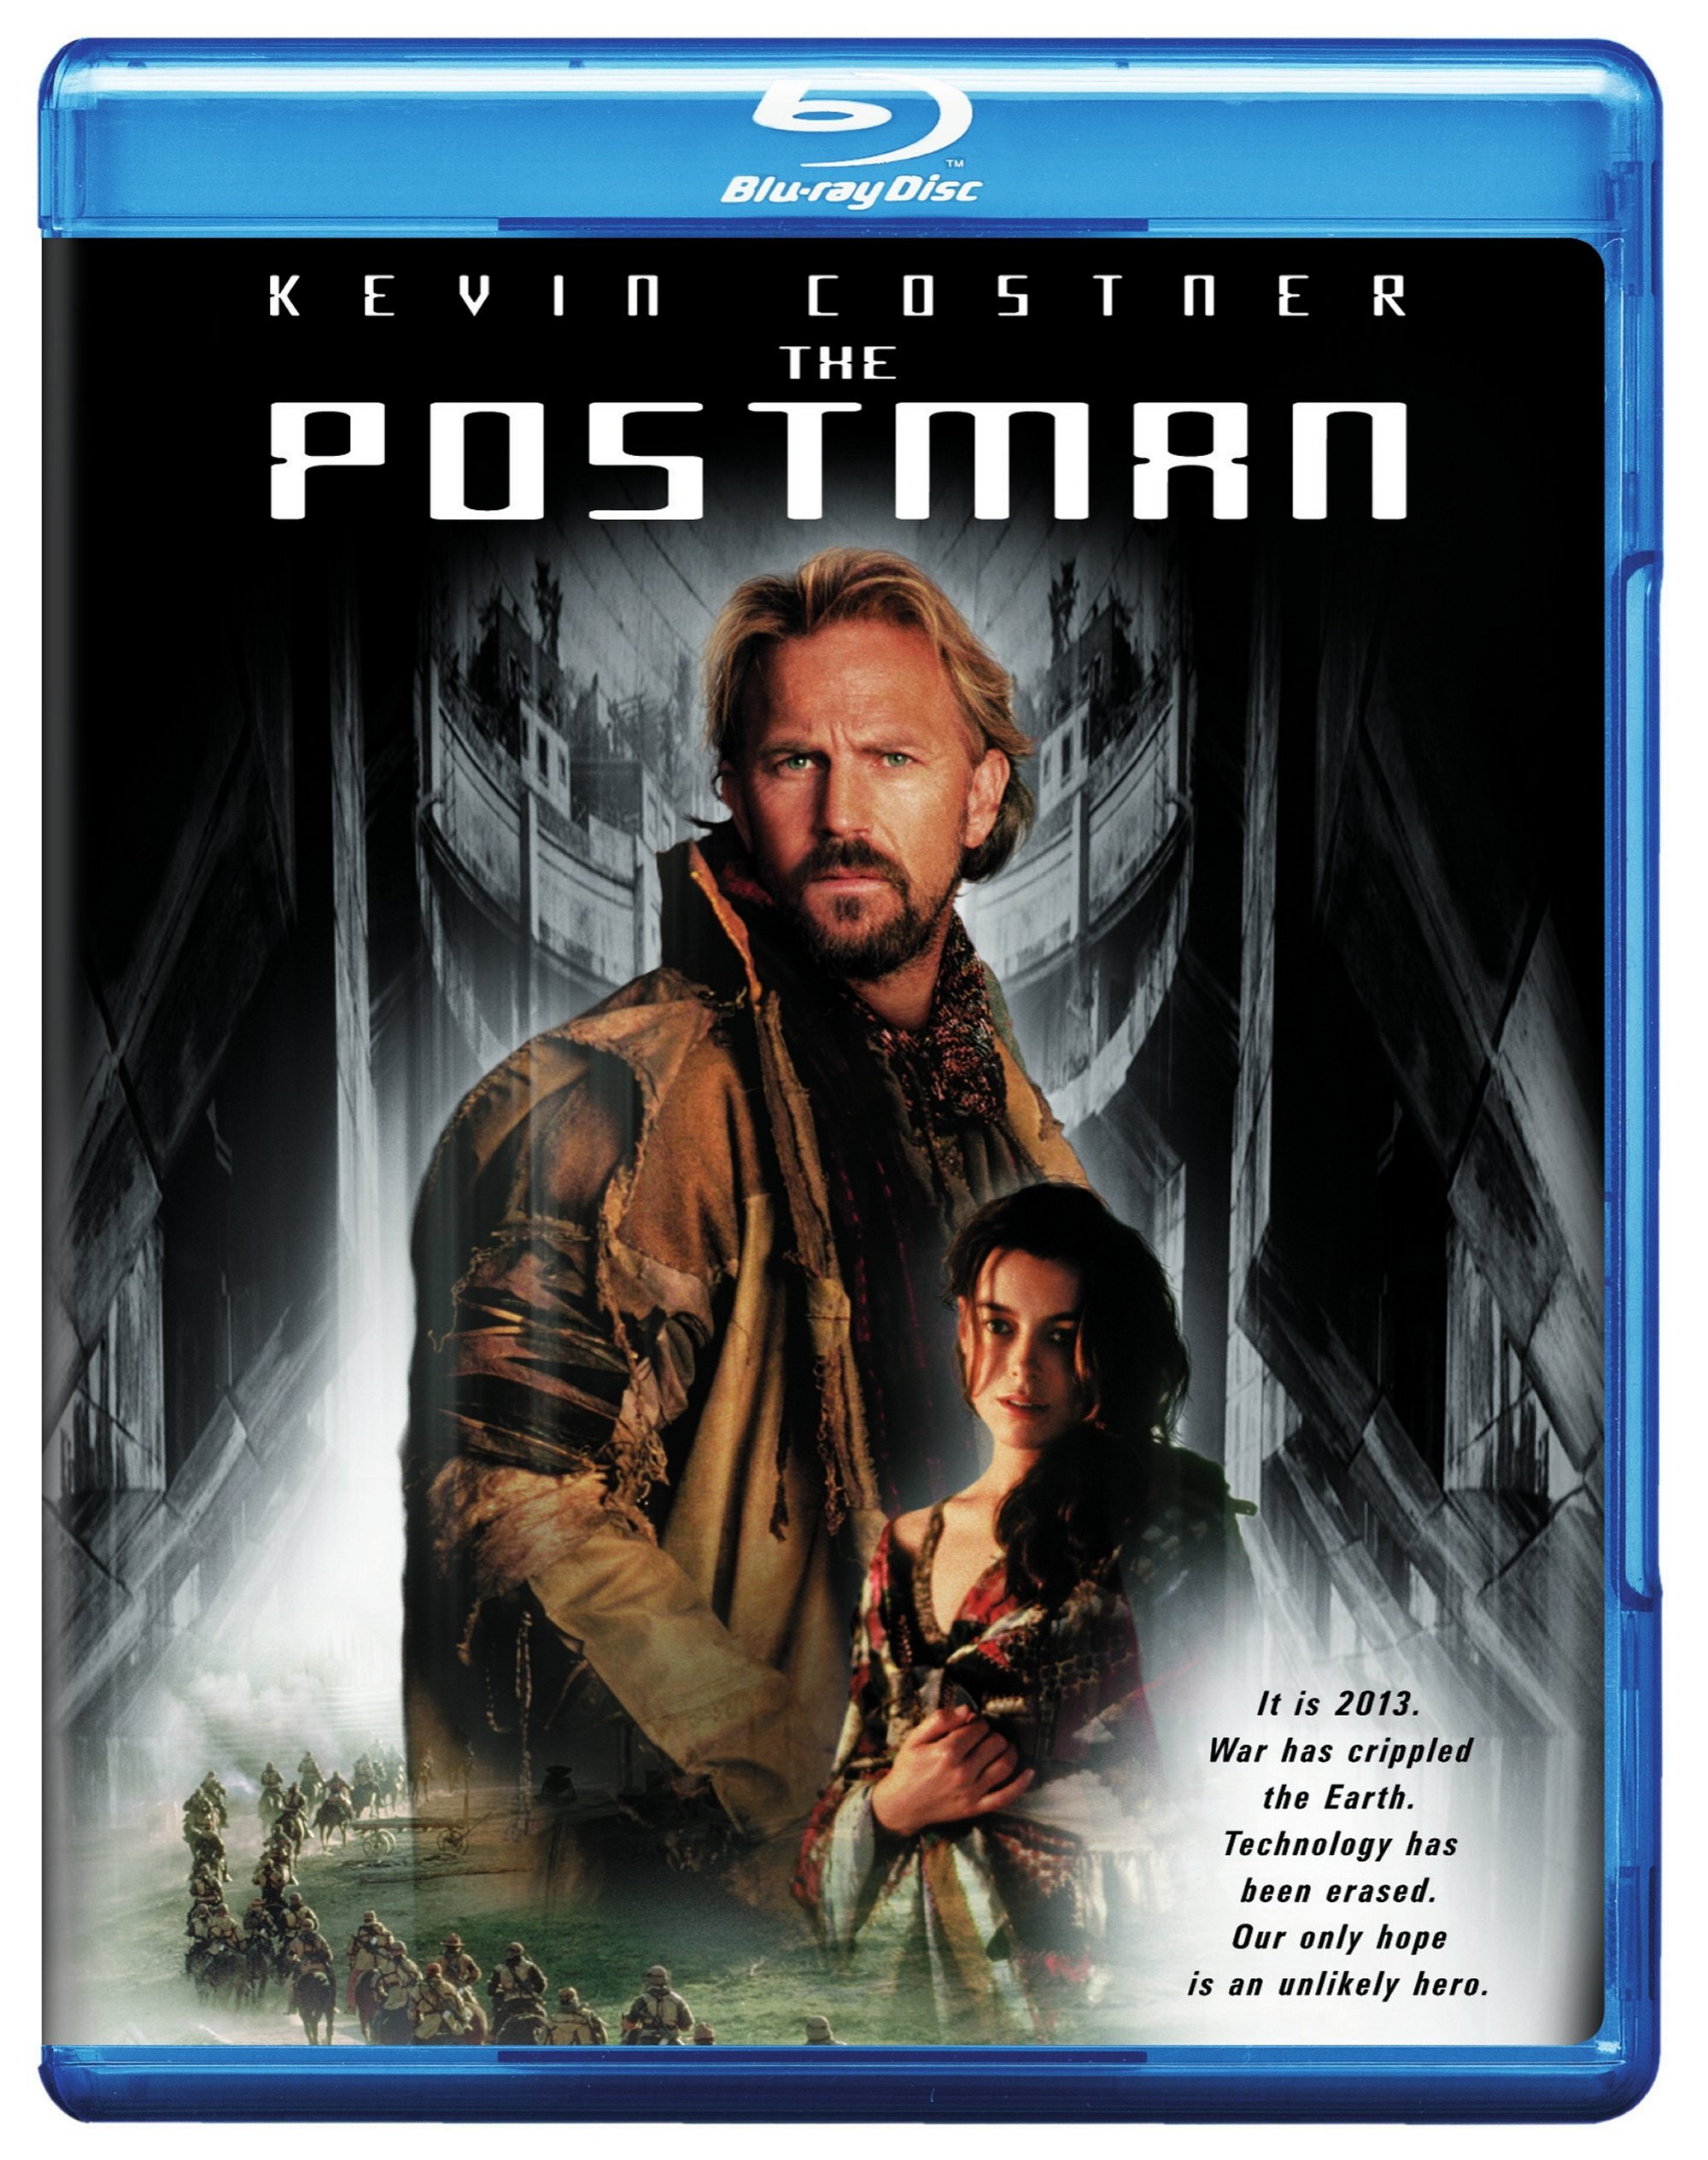 The Postman - Blu-ray [ 1997 ]  - Action Movies On Blu-ray - Movies On GRUV